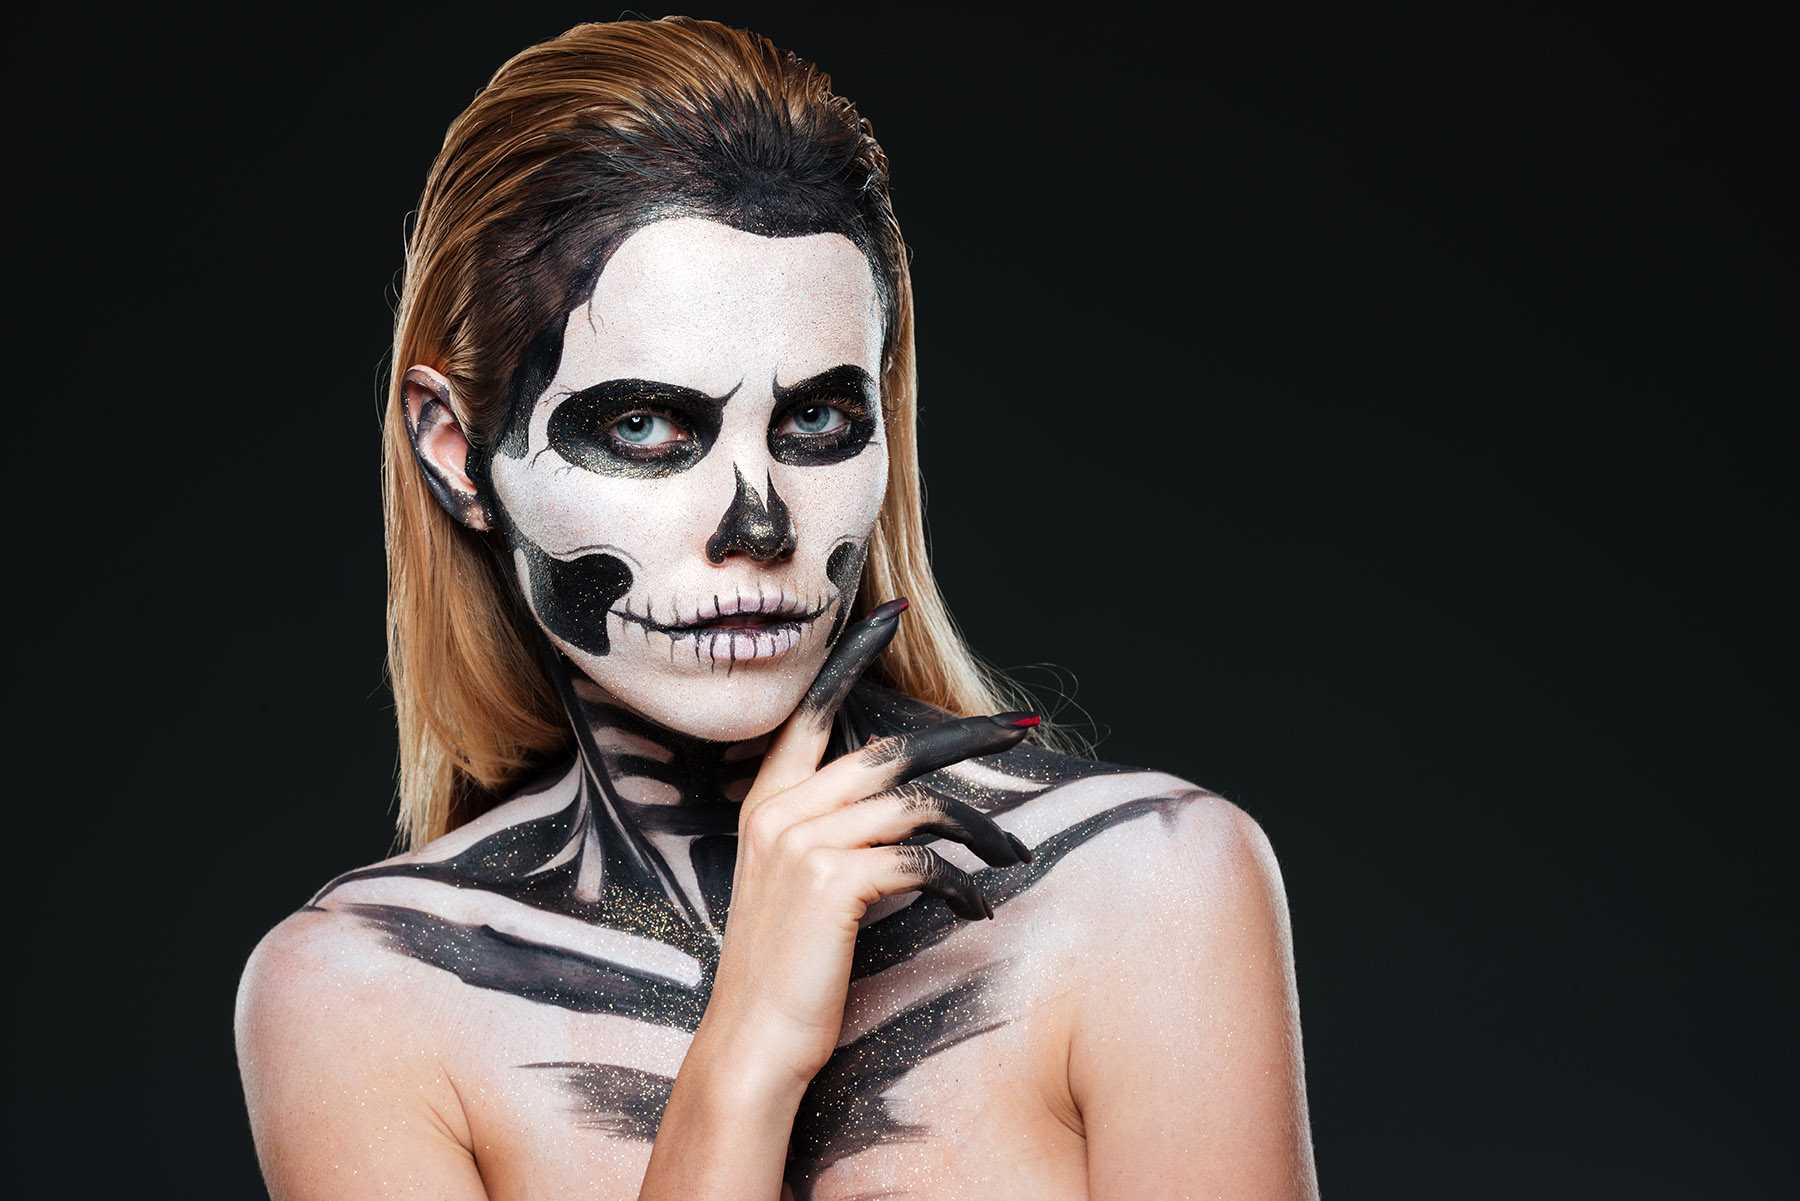 Young woman with gothic skeleton makeup over black background